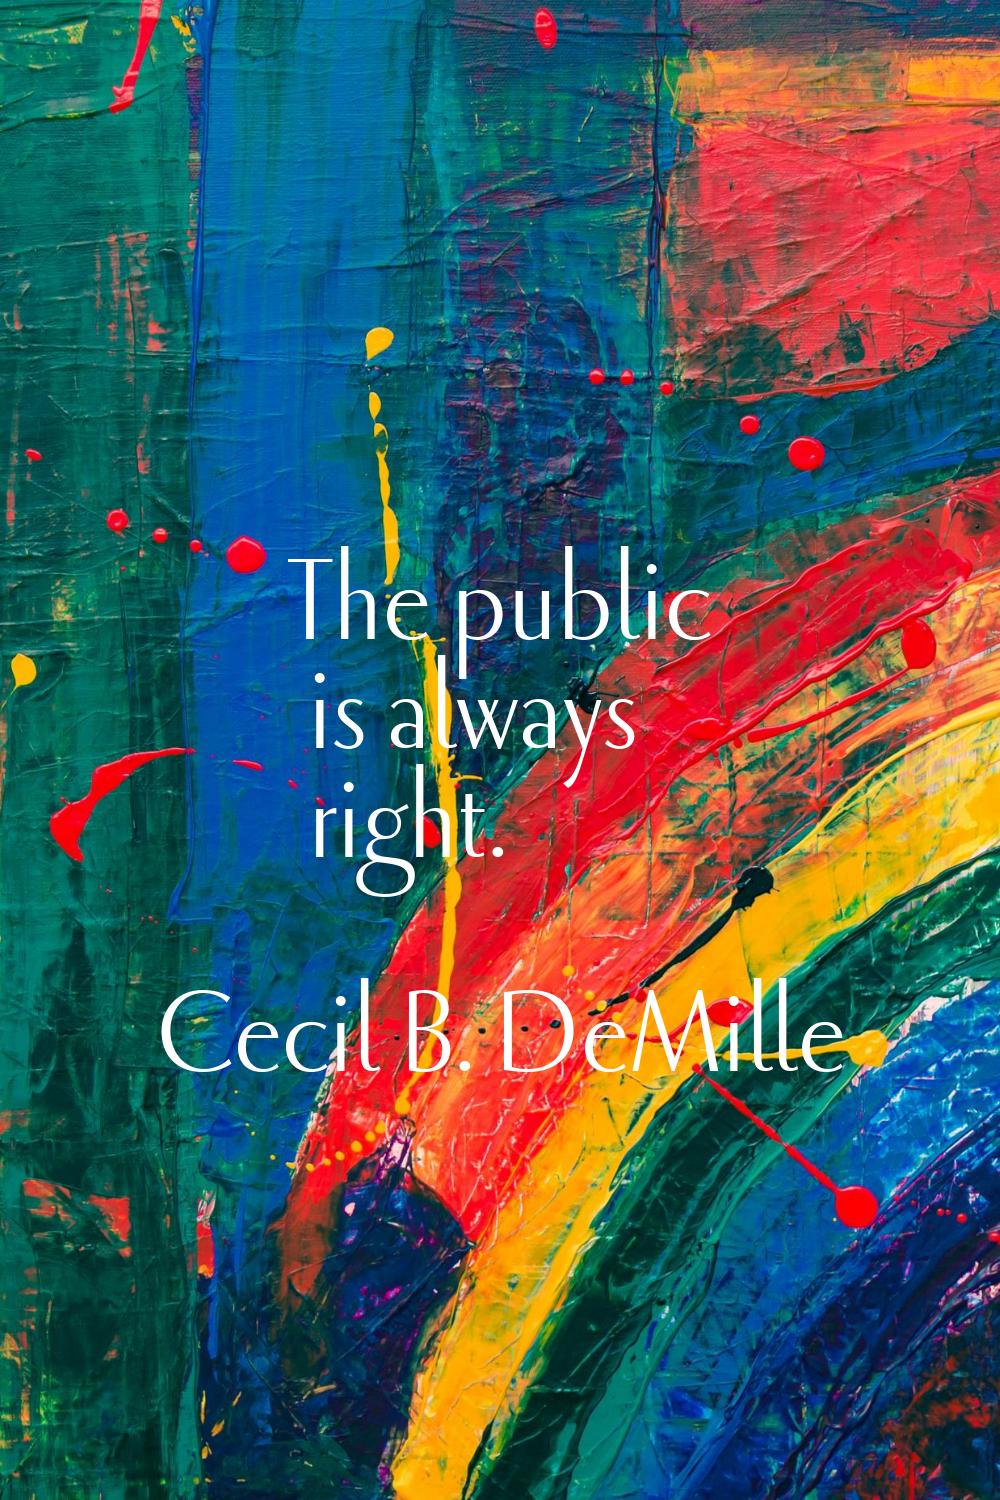 The public is always right.